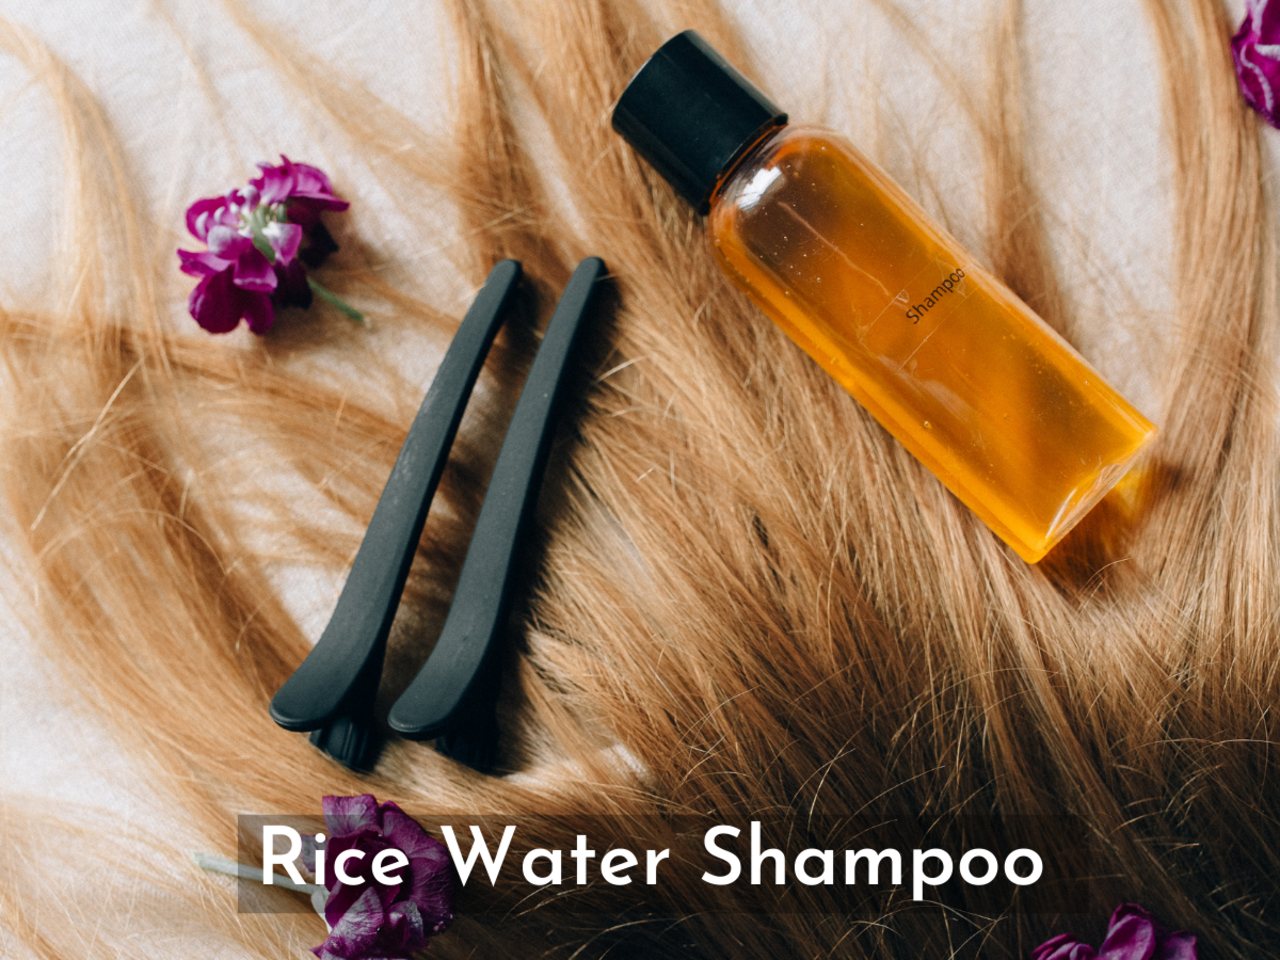 Rice Water Shampoo Options For Healthy Hair - Times of India (March, 2023)